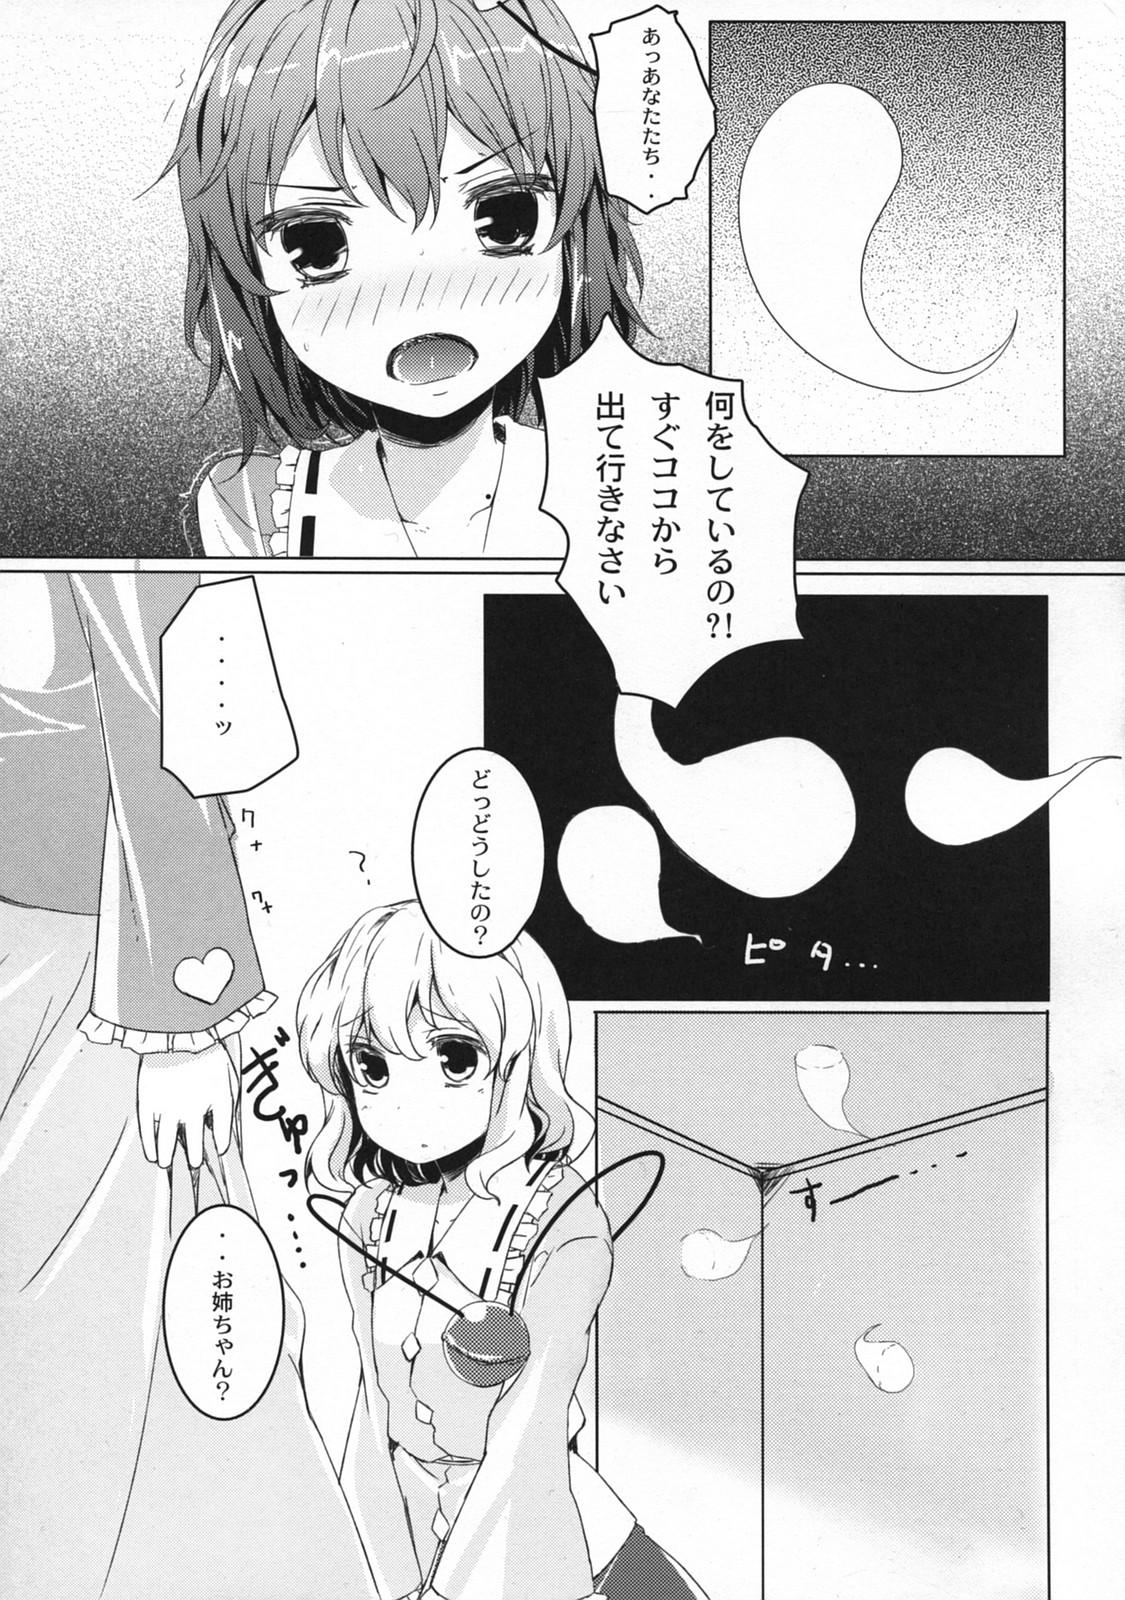 Underwear BABY BAD DREAM - Touhou project Pinoy - Page 8